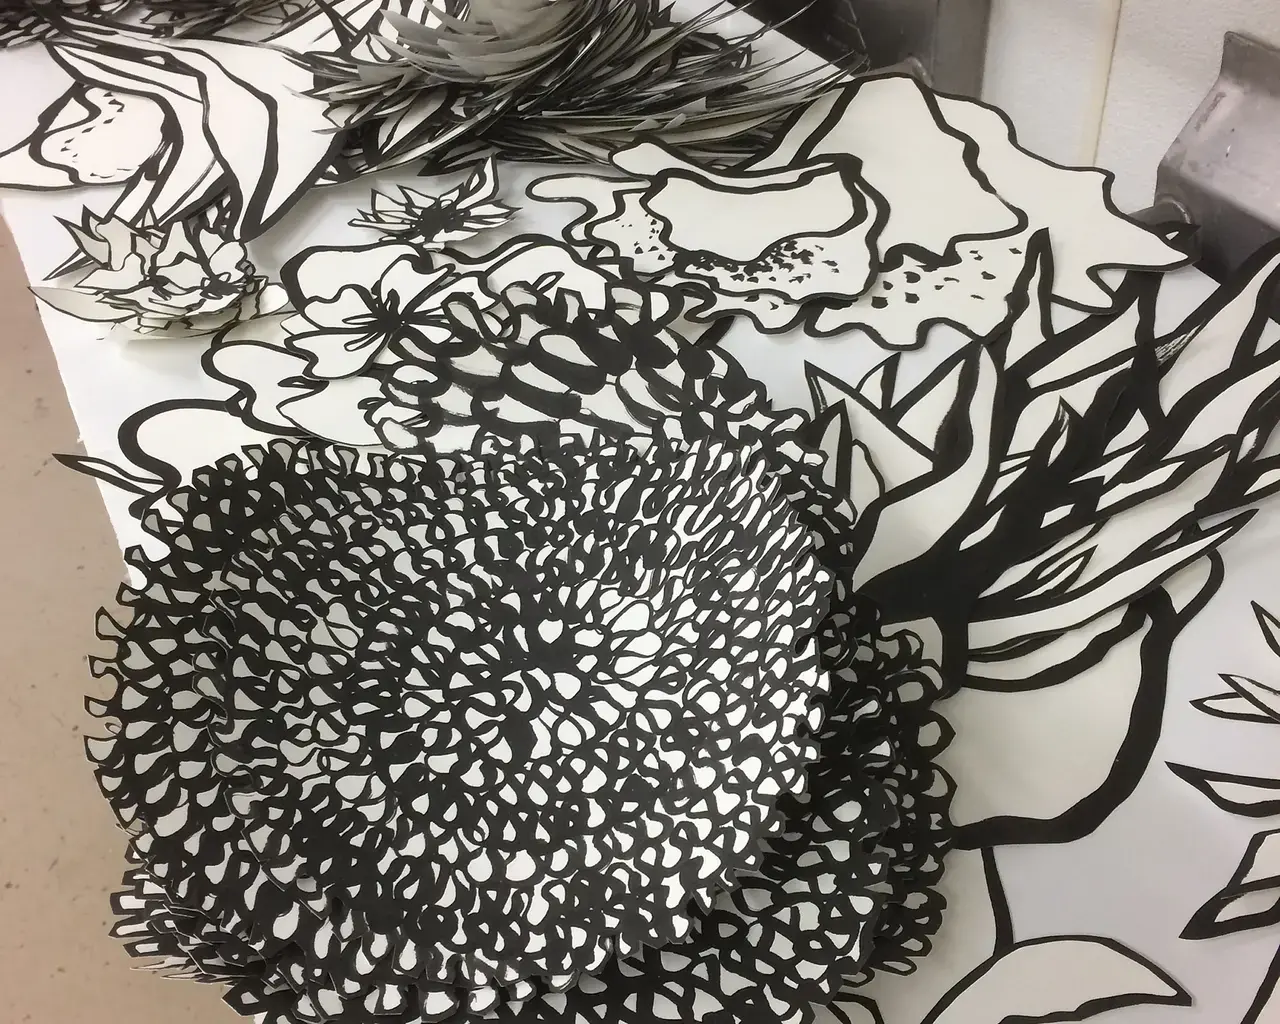 Astrid Bowlby, The Music Always Round Me, work in progress, ink on cut paper. Photo courtesy of the artist.